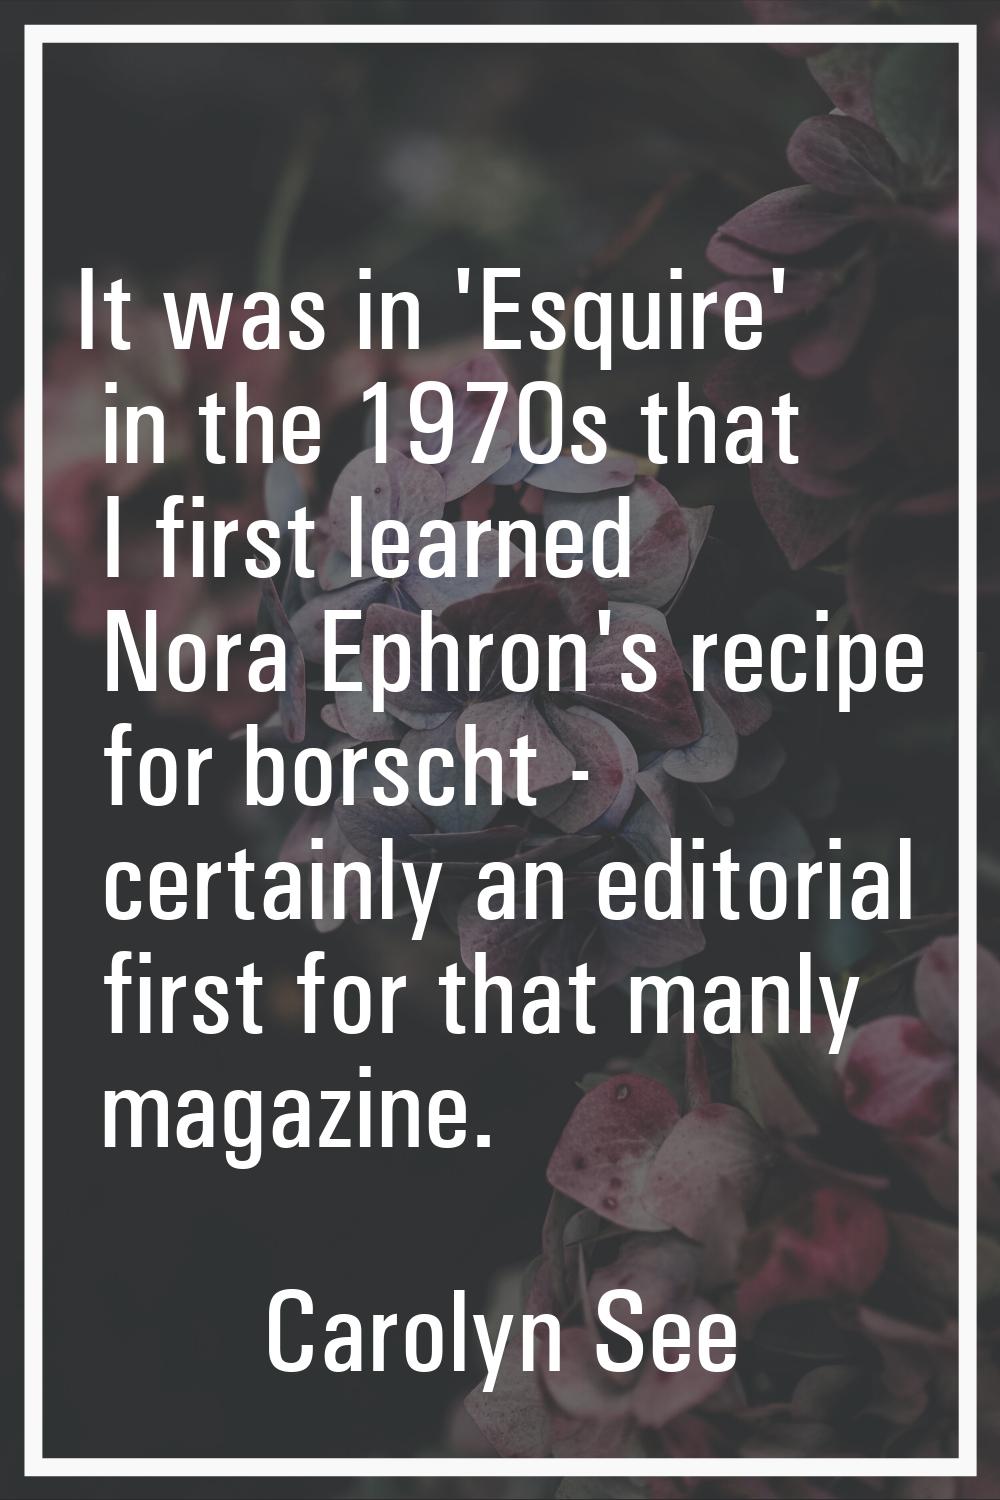 It was in 'Esquire' in the 1970s that I first learned Nora Ephron's recipe for borscht - certainly 